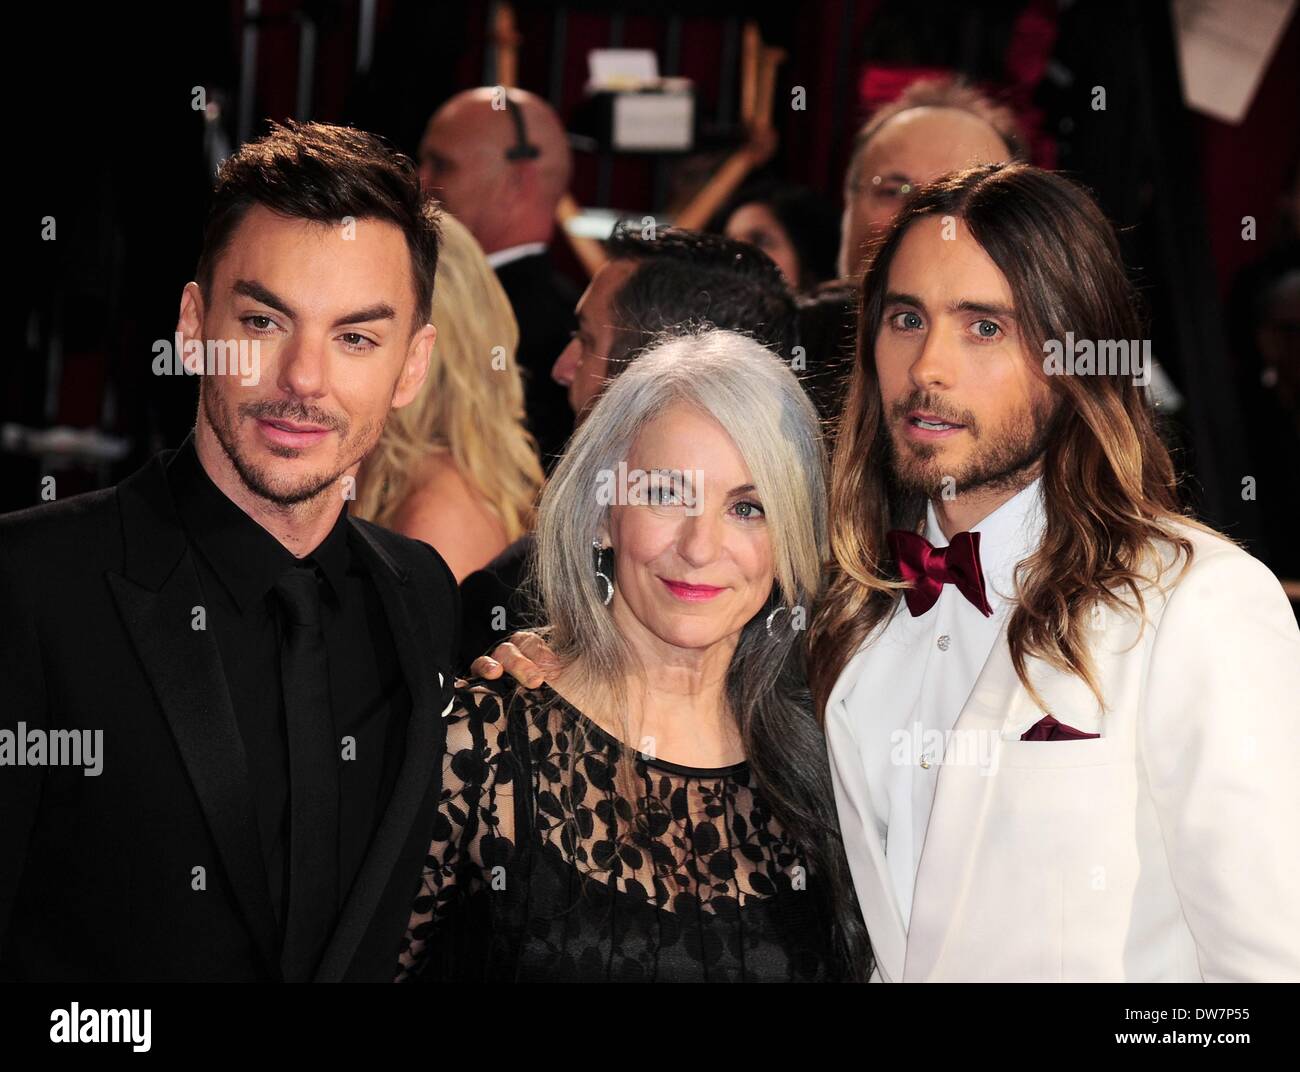 Los Angeles, CA. 2nd Mar, 2014. Shannon Leto, Constance Leto, Jared Leto at arrivals for The 86th Annual Academy Awards - Arrivals 2 - Oscars 2014, The Dolby Theatre at Hollywood and Highland Center, Los Angeles, CA March 2, 2014. Credit:  Gregorio Binuya/Everett Collection/Alamy Live News Stock Photo